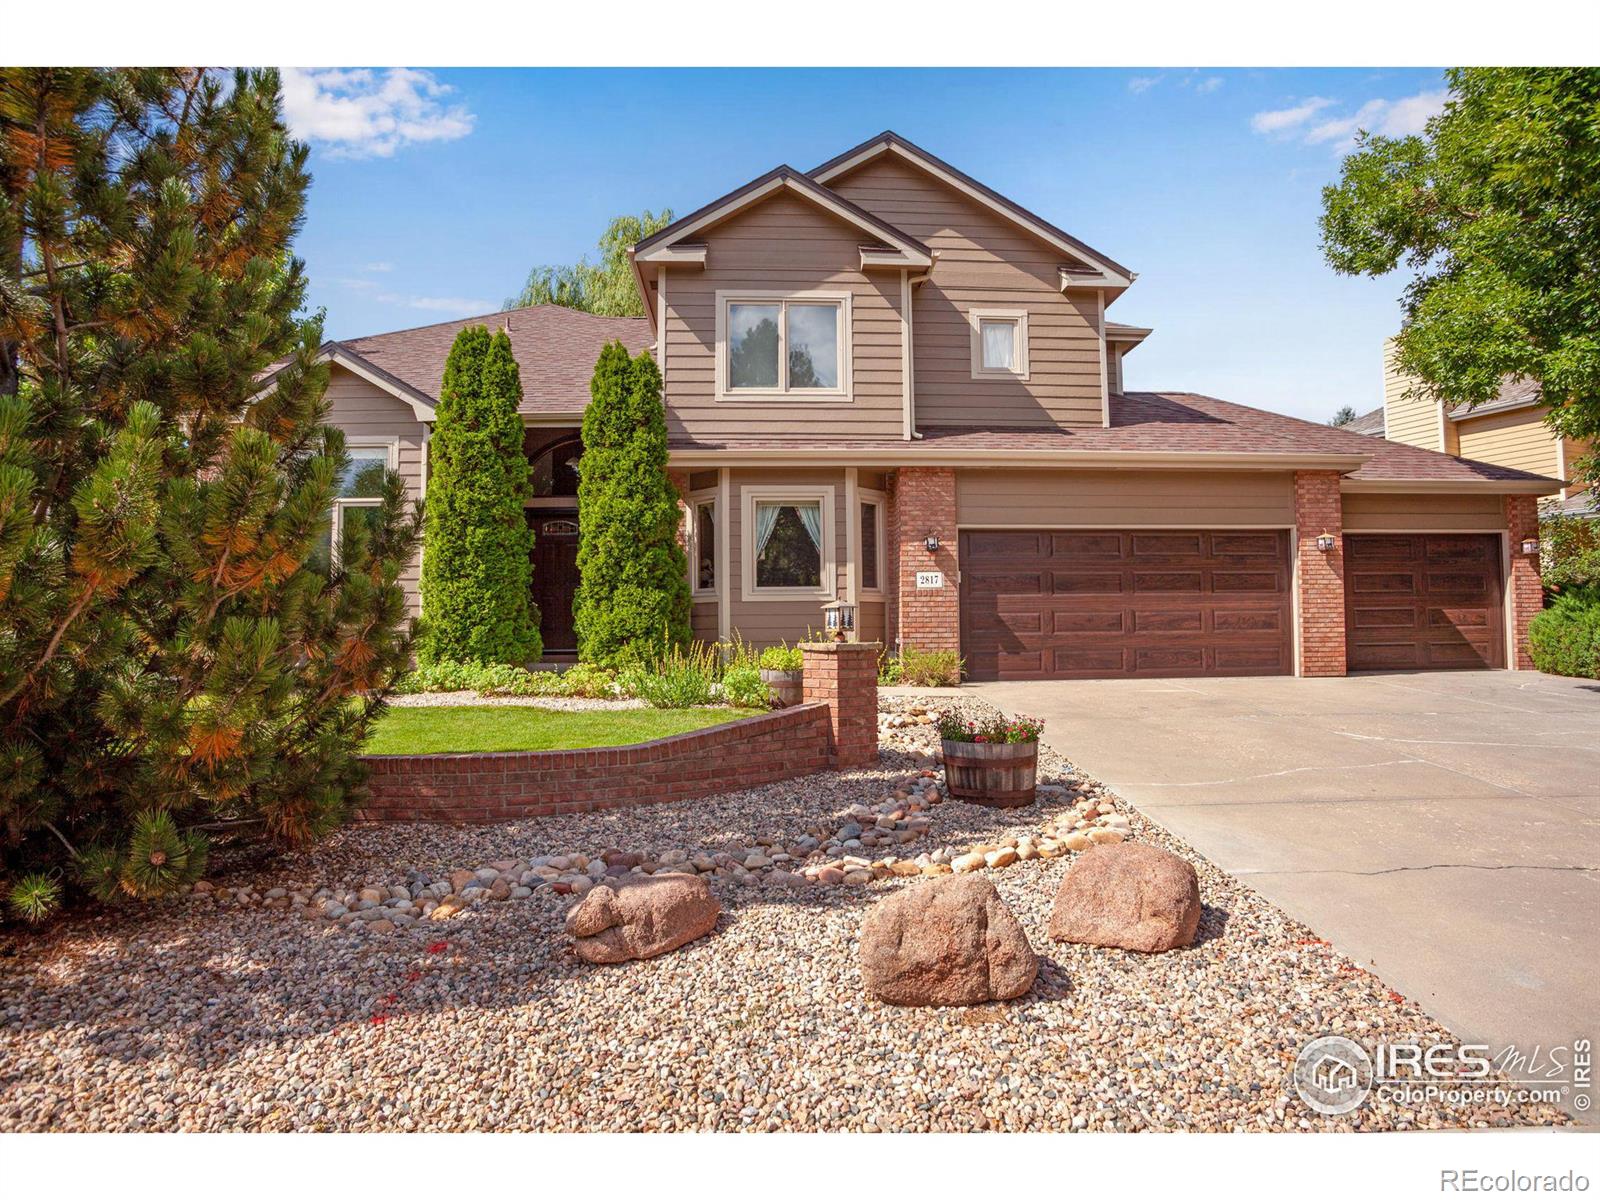 2817  Cherrystone Place, fort collins MLS: 123456789996065 Beds: 5 Baths: 4 Price: $840,000